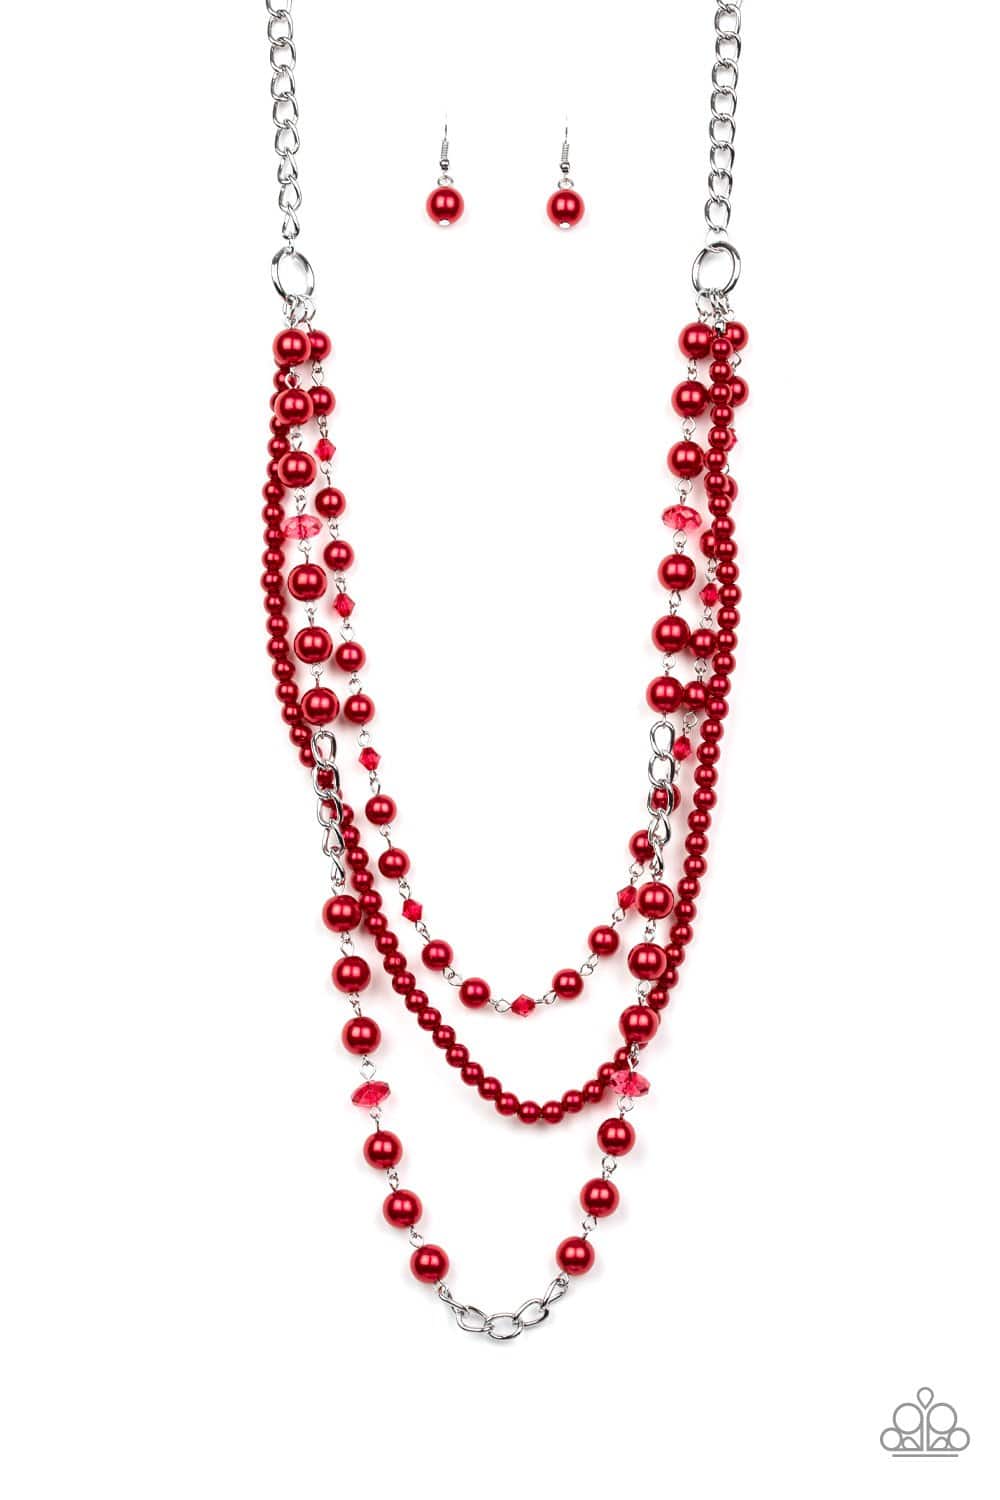 New York City Chic - Red Pearl Necklace - Paparazzi Accessories - GlaMarous Titi Jewels